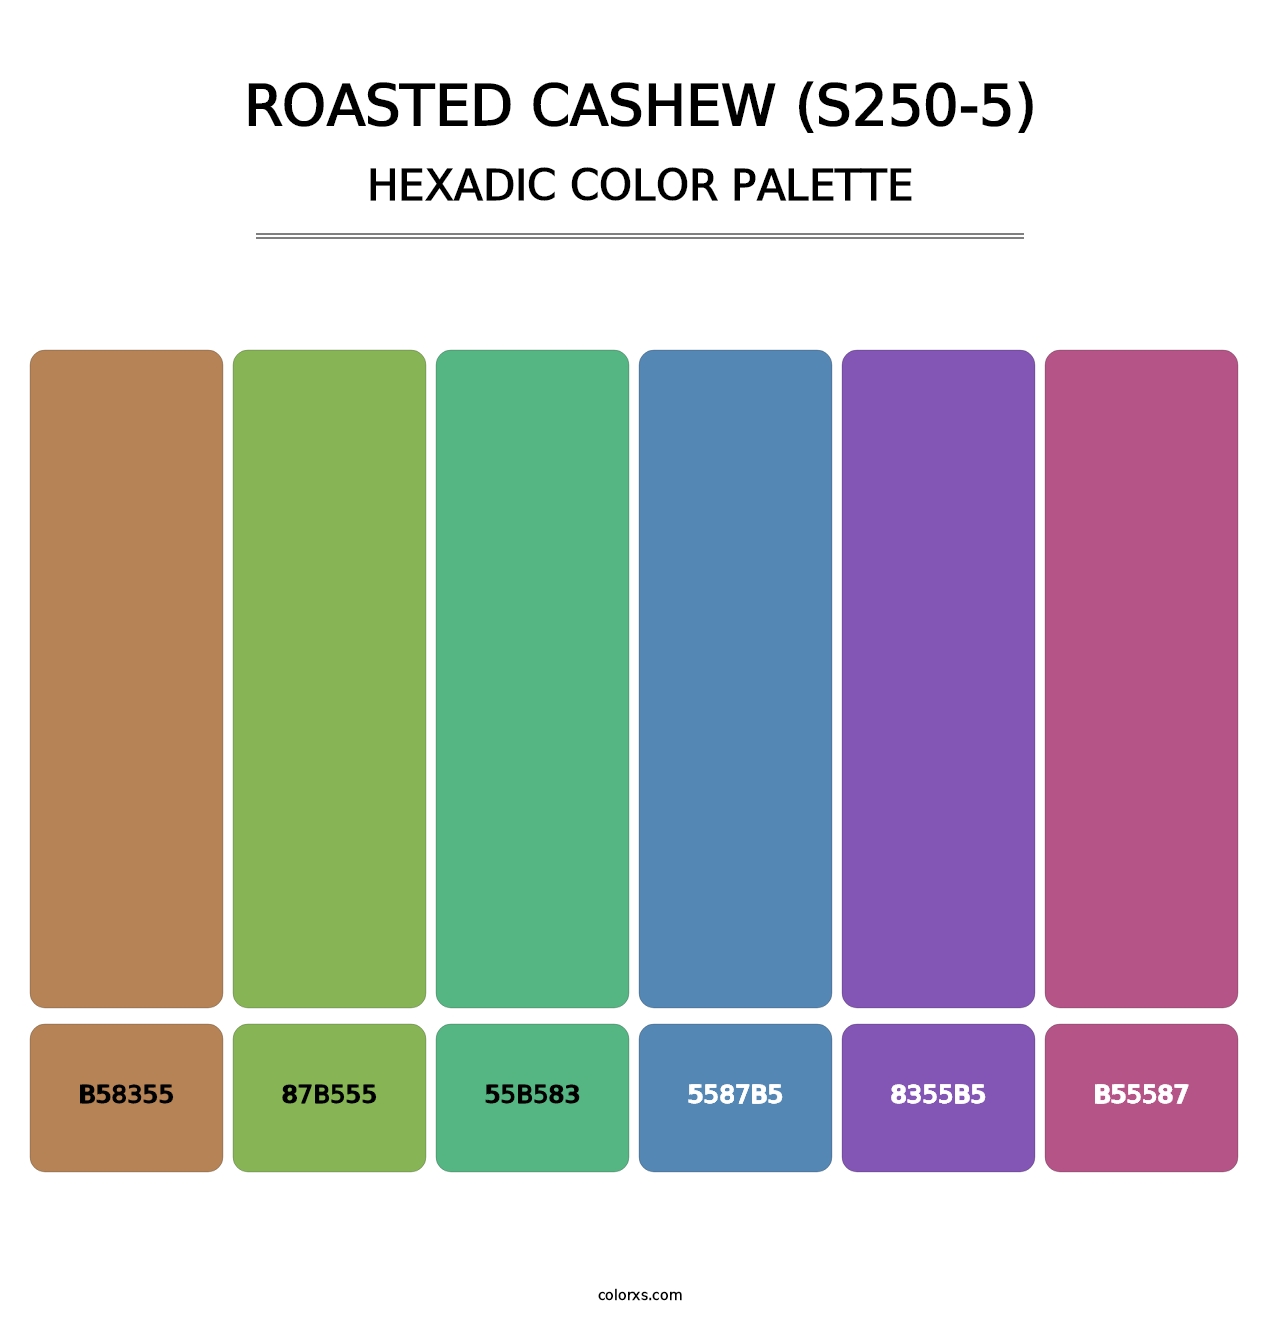 Roasted Cashew (S250-5) - Hexadic Color Palette